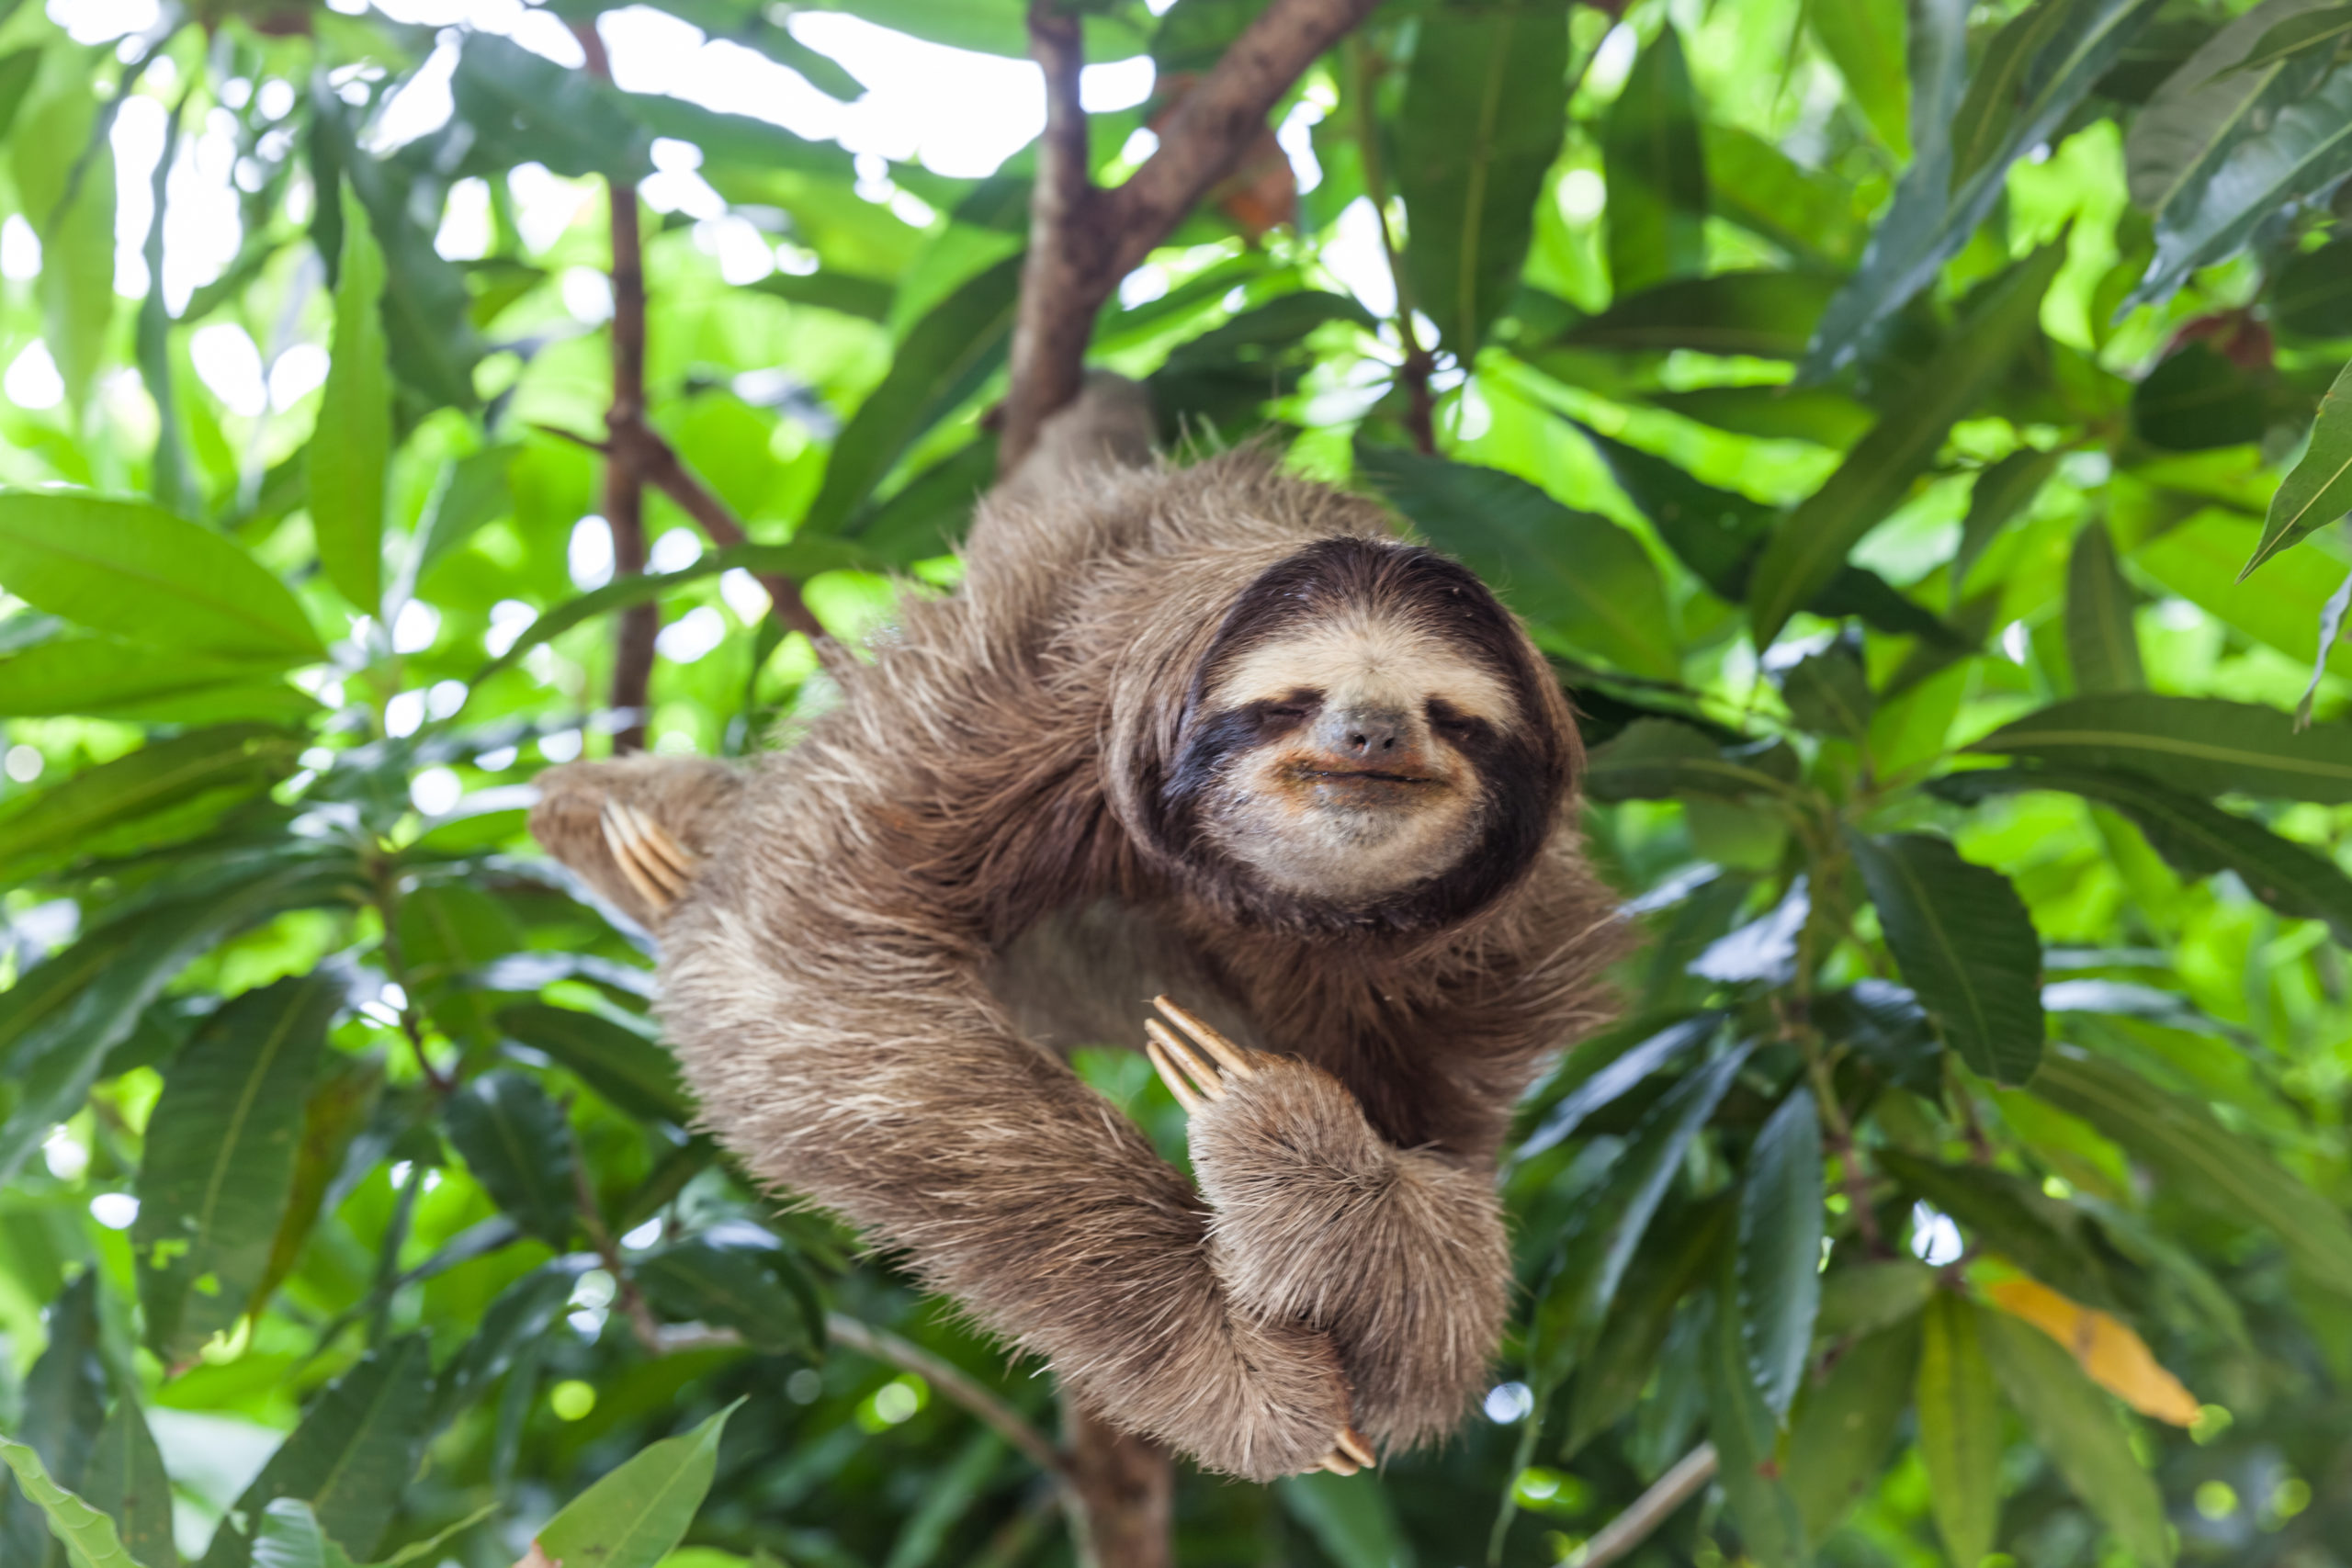 Is it legal to own a sloth?